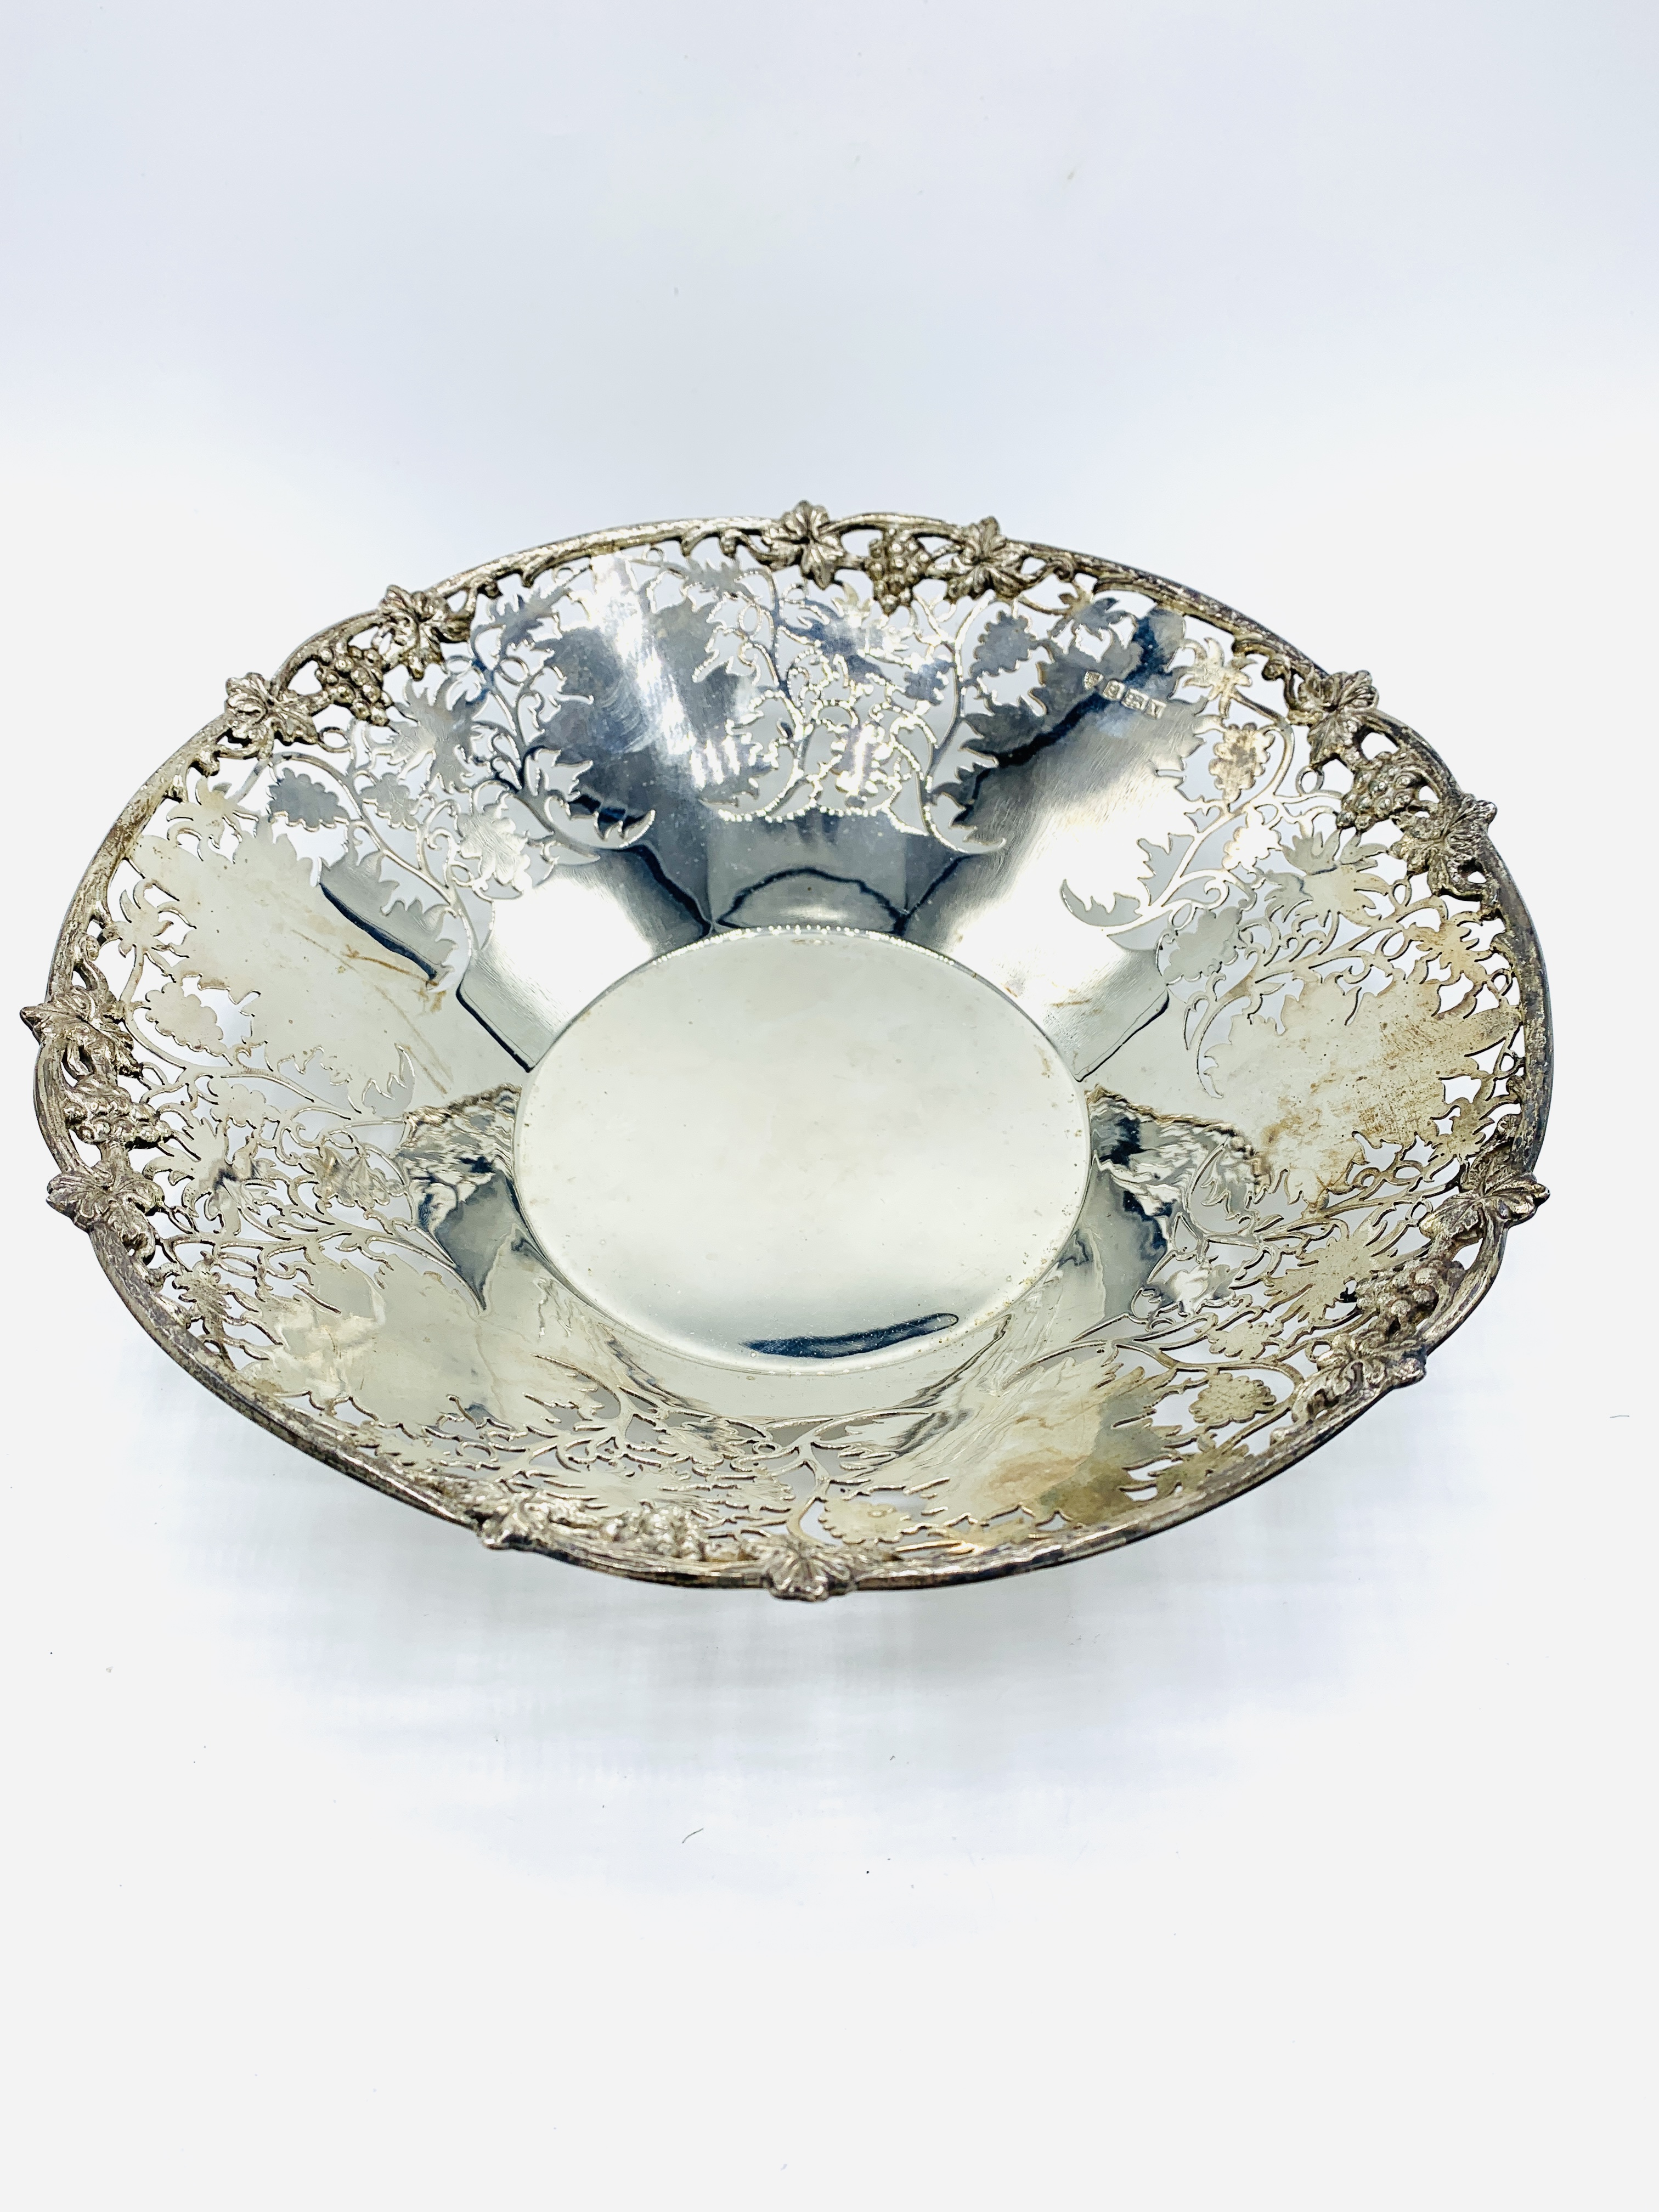 A silver pierced sided fruit bowl by J B Chatterley & Sons Ltd - Image 2 of 4